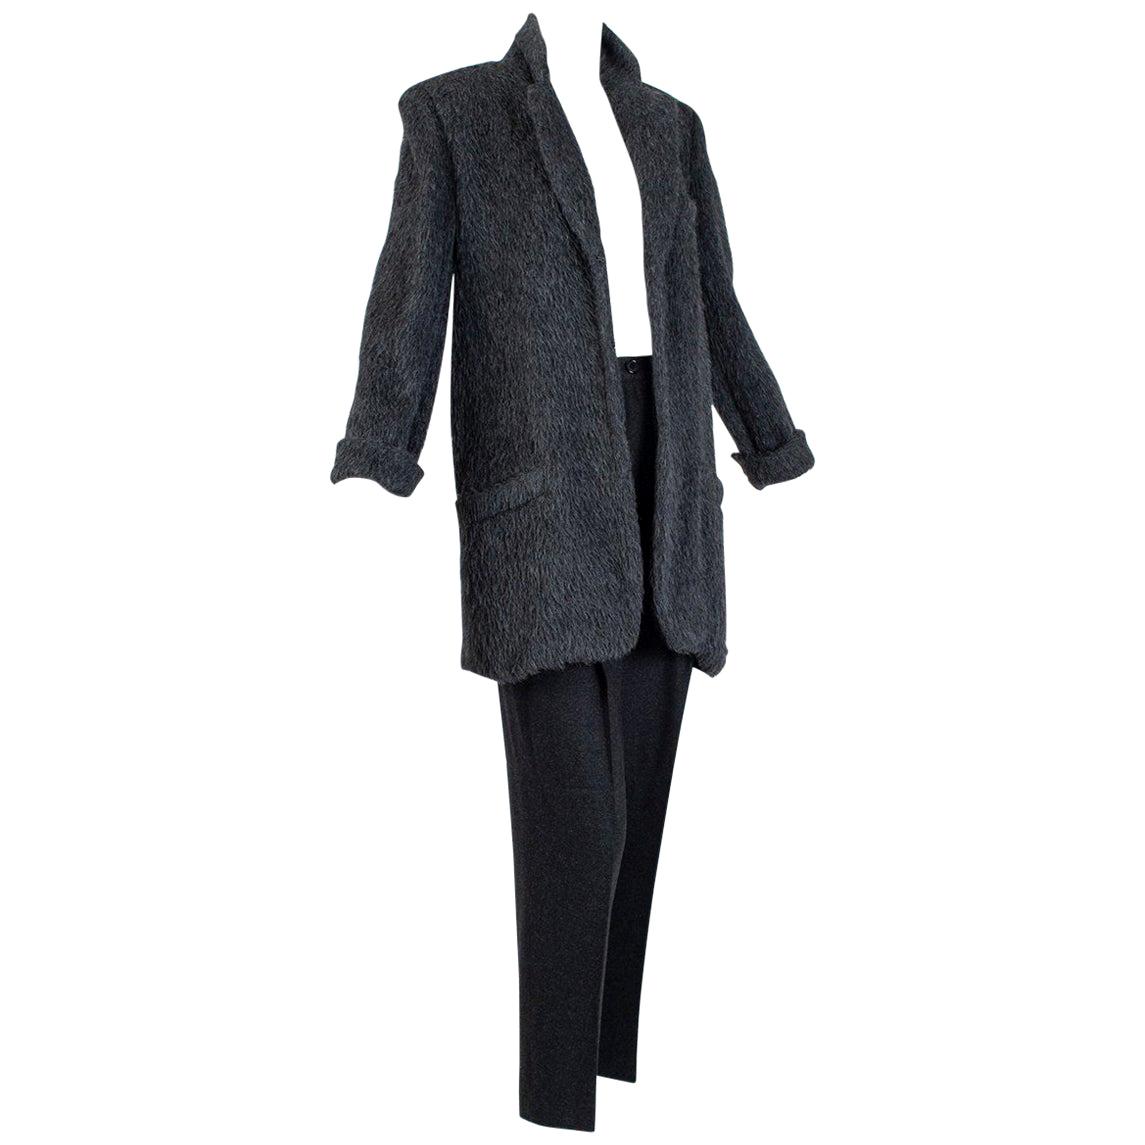 Donna Karan Charcoal Gray Teddy Bear Cashmere and Alpaca Pant Suit - M, 1990s For Sale